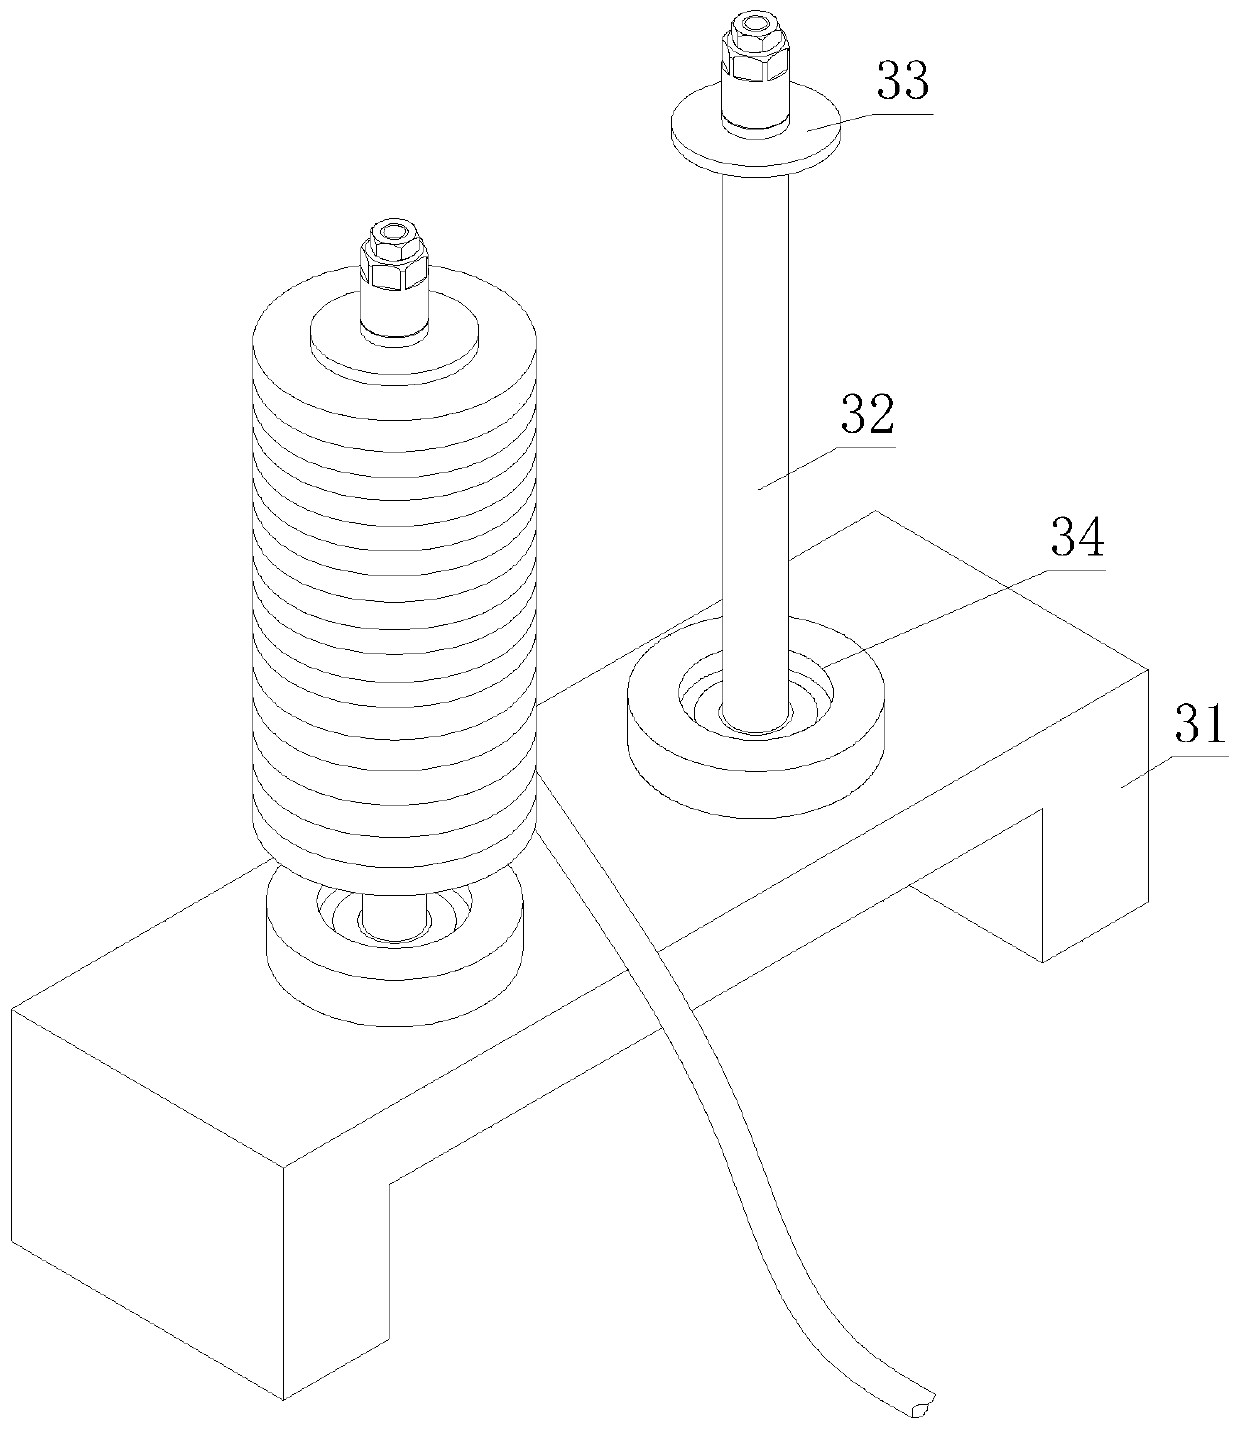 Rolling cutter for conical non-woven fabric gauze mask ear bands and method